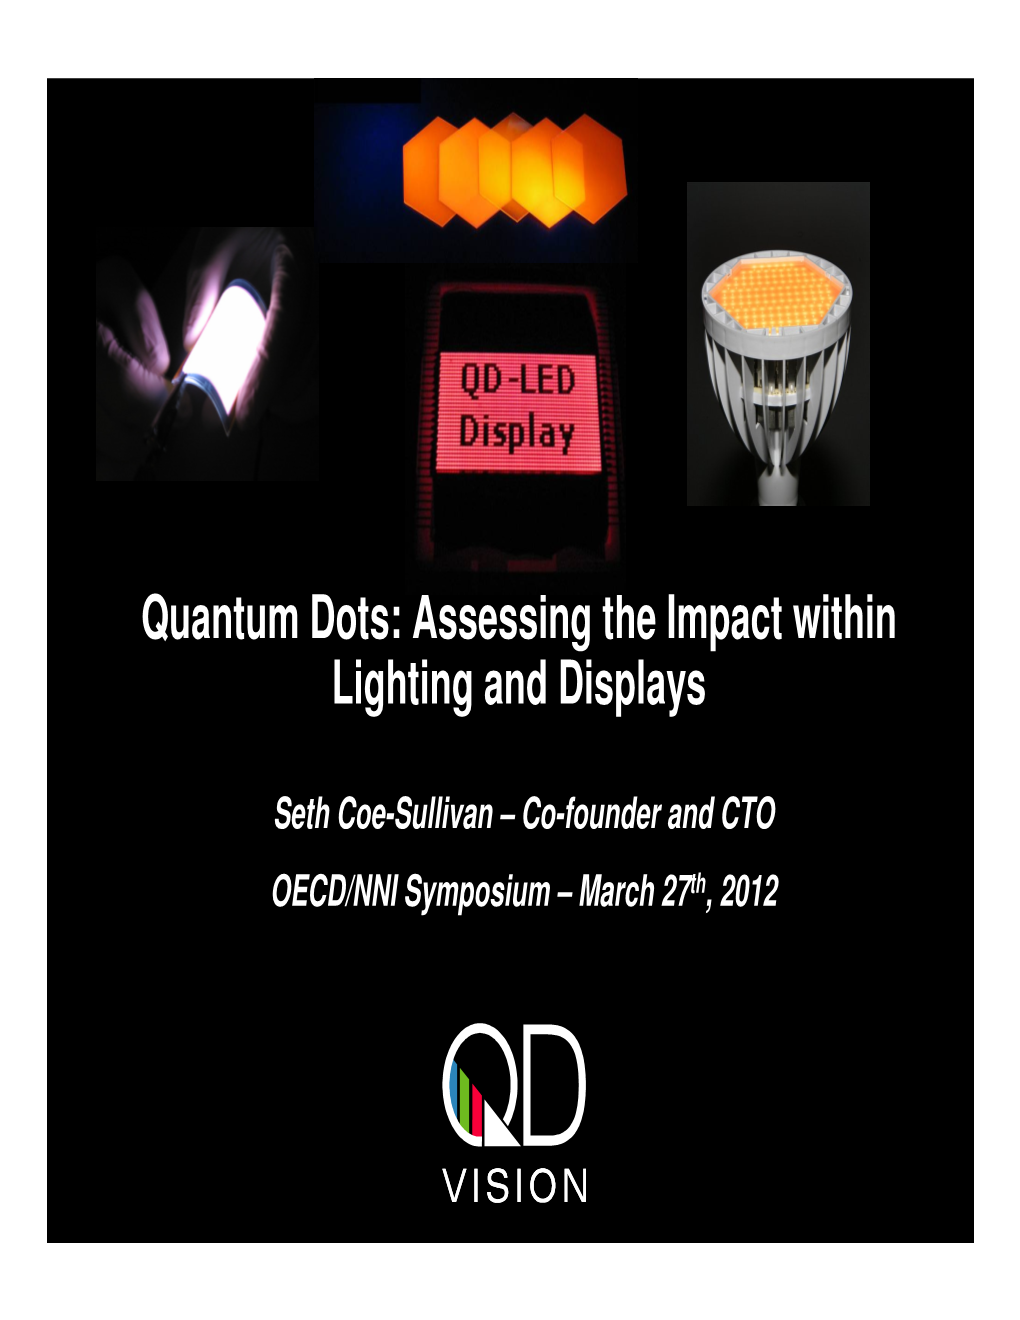 Quantum Dots: Assessing the Impact Within Lighting and Displays